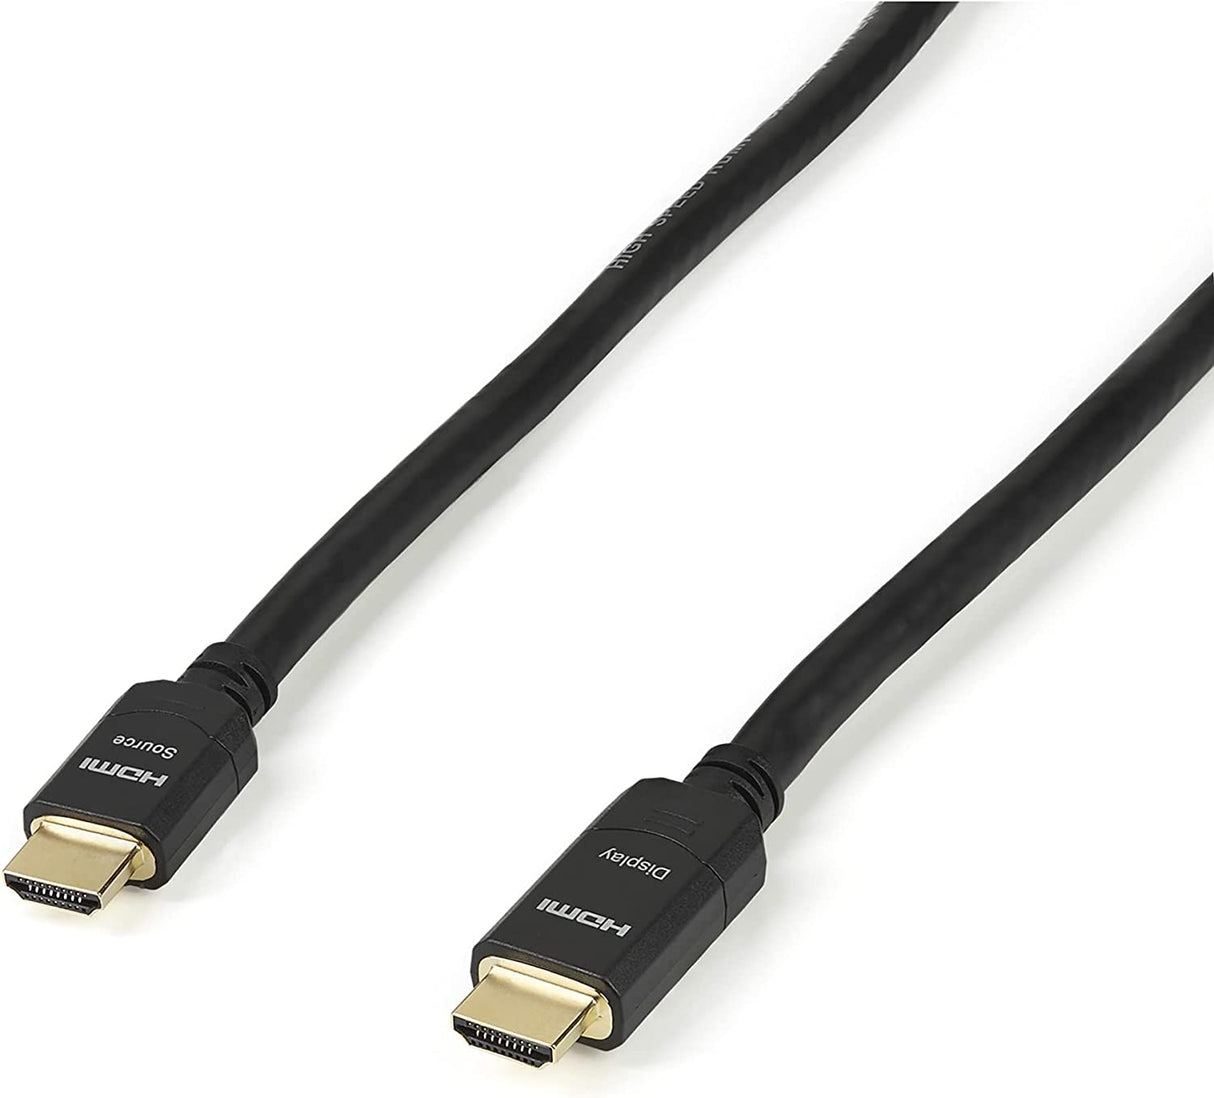 StarTech.com 80 ft Active High Speed HDMI Cable - Ultra HD 4k x 2k HDMI Cable - HDMI to HDMI M/M - 80ft 1080p HDMI Cable - Gold-Plated (HDMIMM80AC) Black